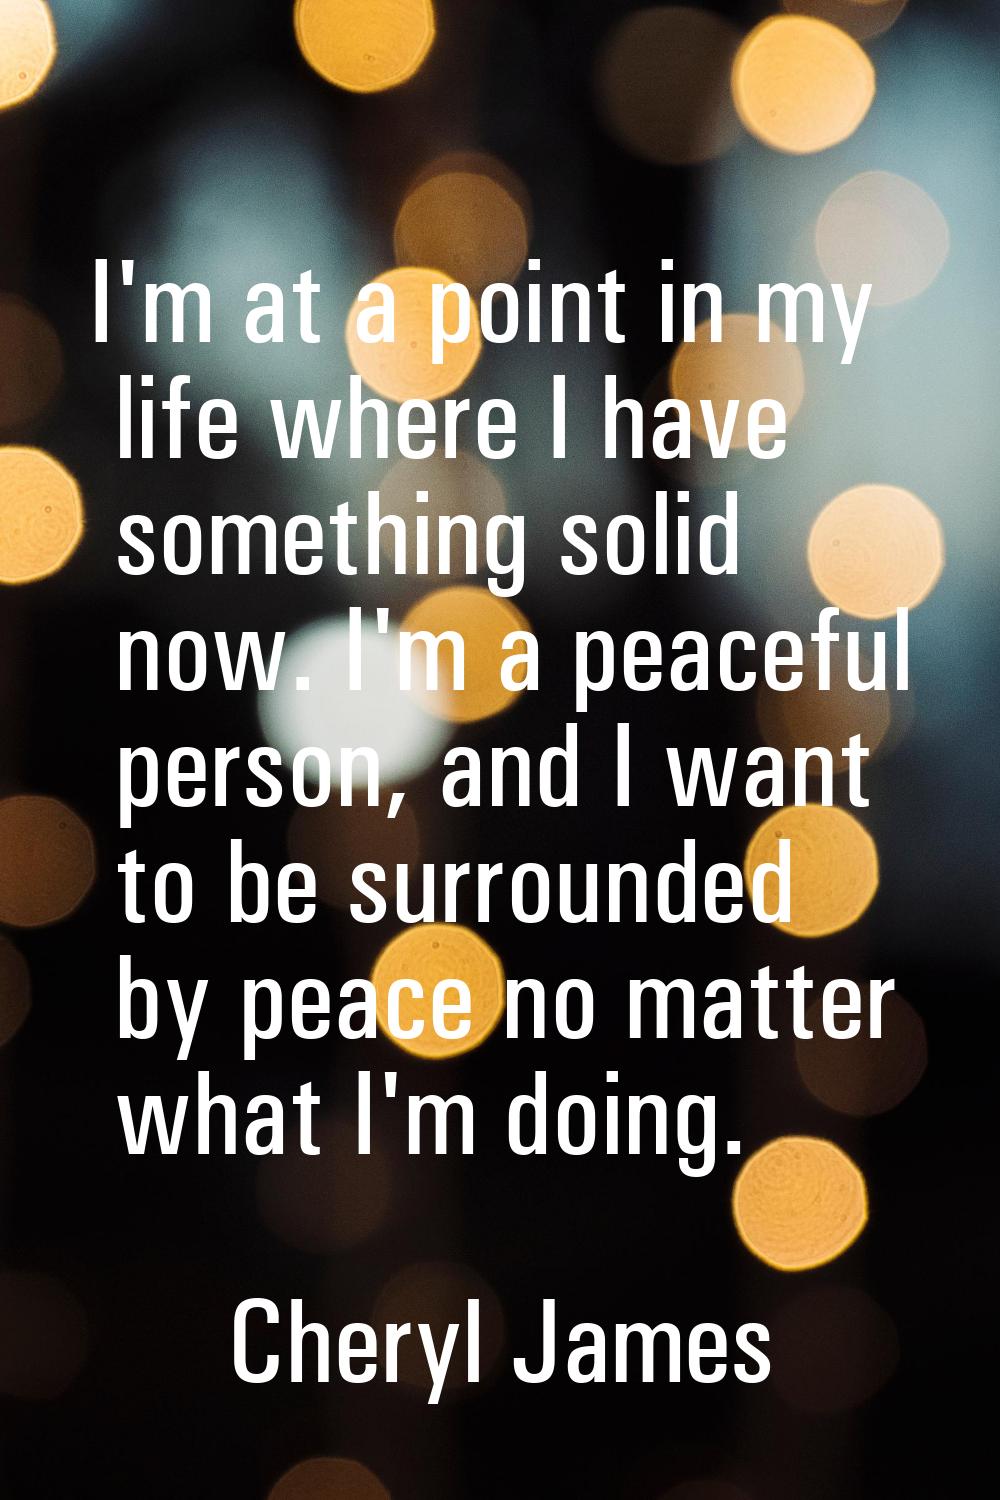 I'm at a point in my life where I have something solid now. I'm a peaceful person, and I want to be